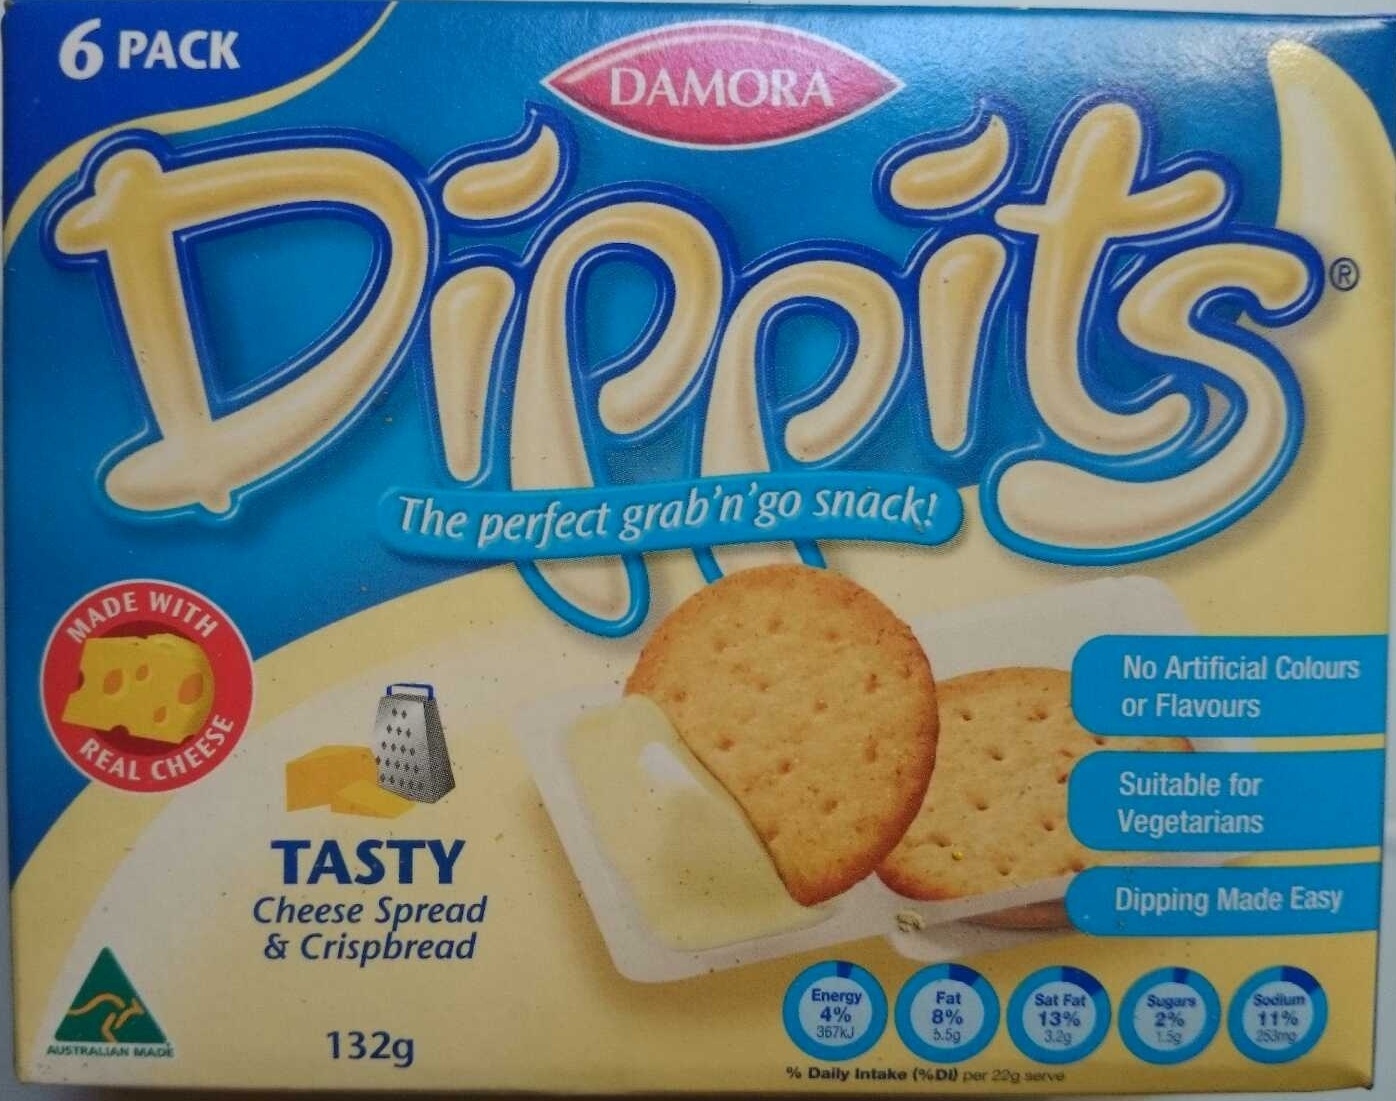 Dippits - Product